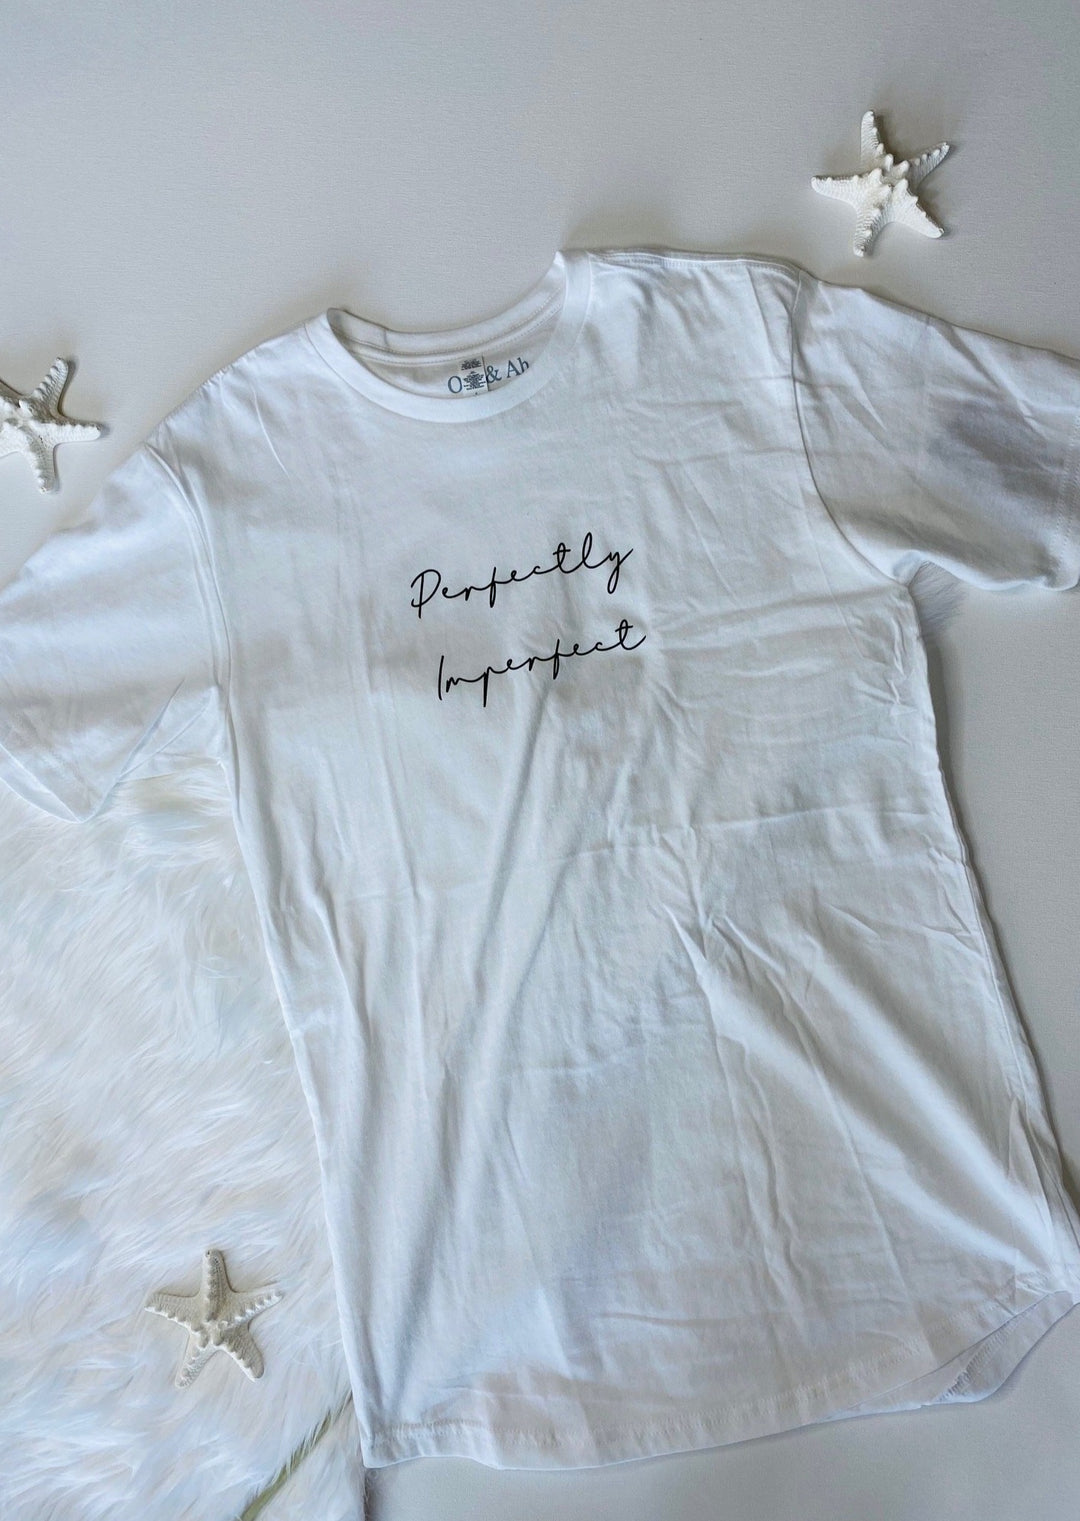 "PERFECTLY IMPERFECT" BED TEE